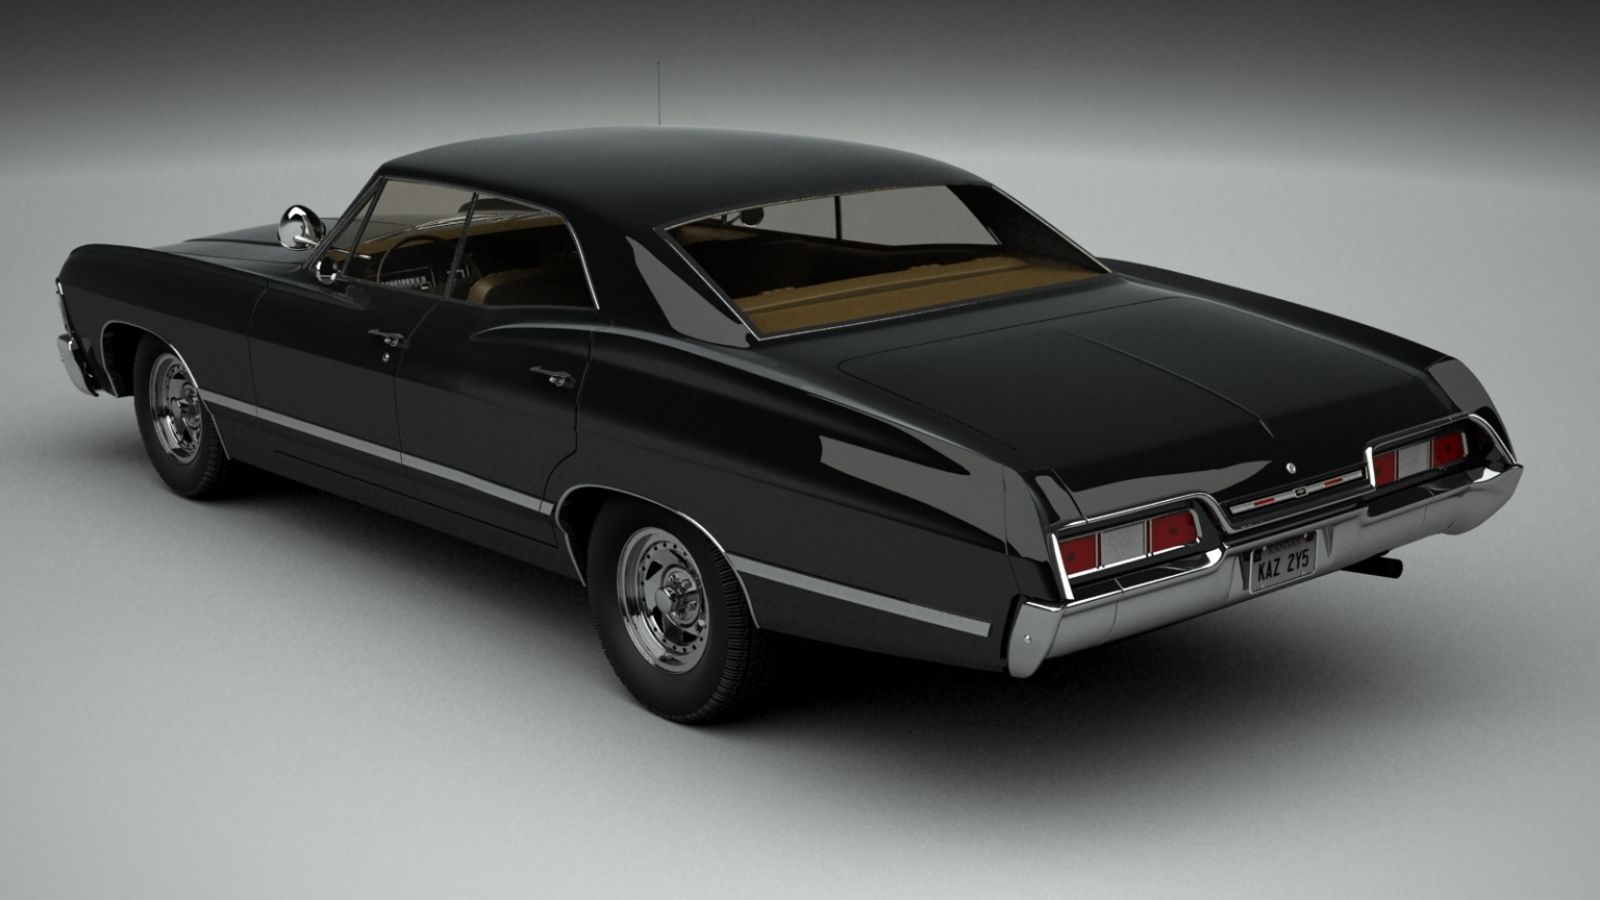 Illustration for article titled This Is What The Chevy Impala Should Have Been